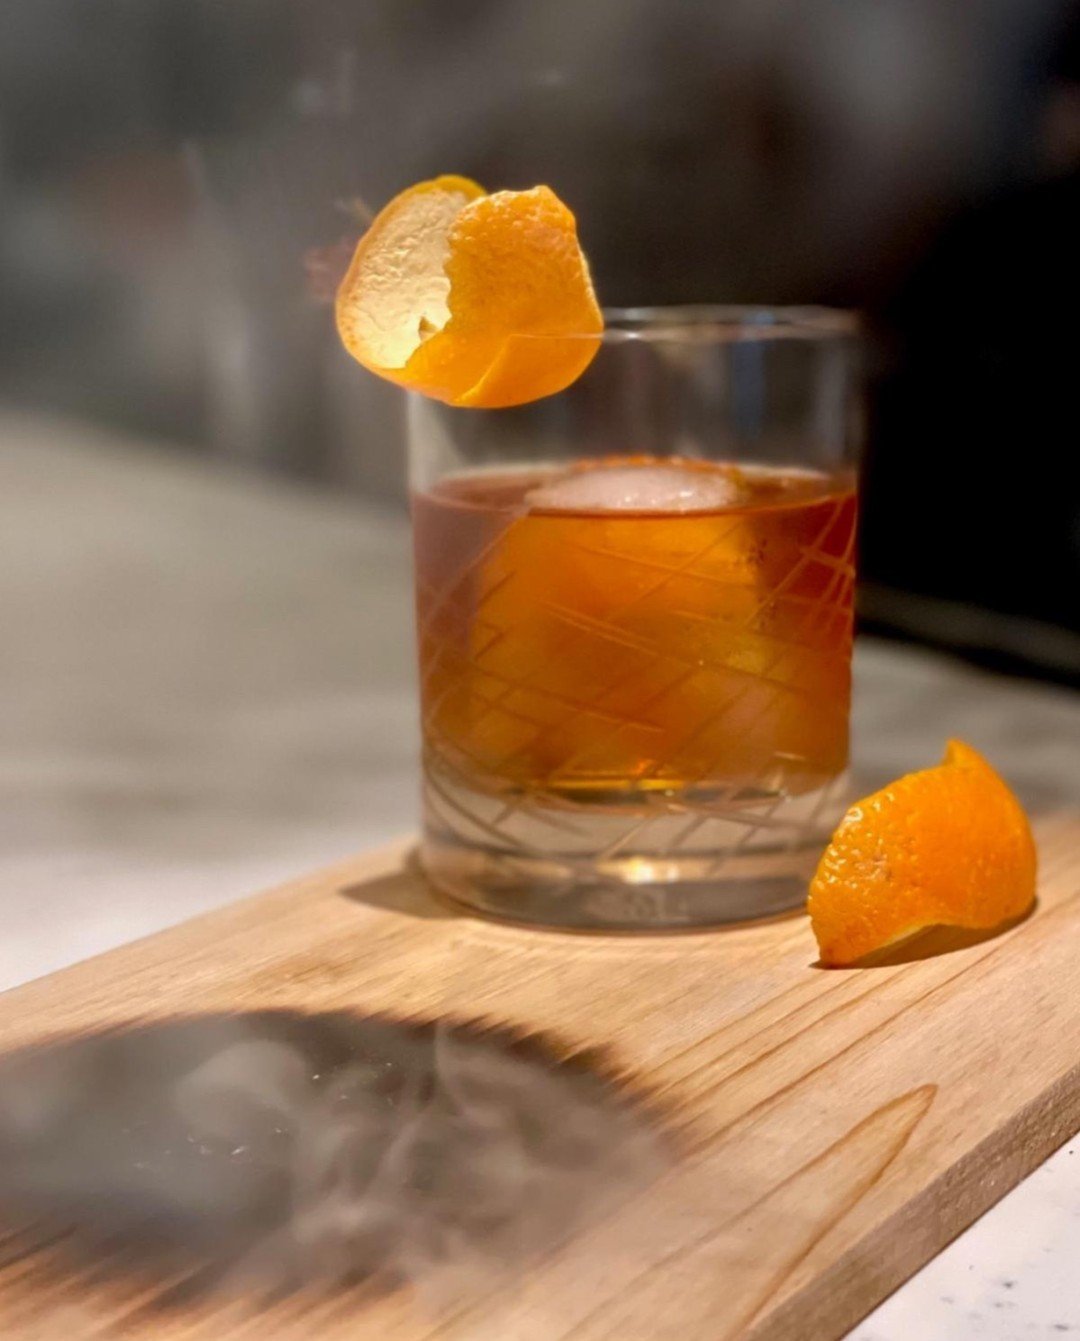 Who needs a real campfire when you can warm up with our Bourbon Campfire? 😉

bourbon, amaro, carpano antica formula vermouth, aromatic bitters, smoked cedar

#677prime #677 #upstatenewyork #steakhouse #albanyny #steak #bourbon #cocktails #fanfavorit